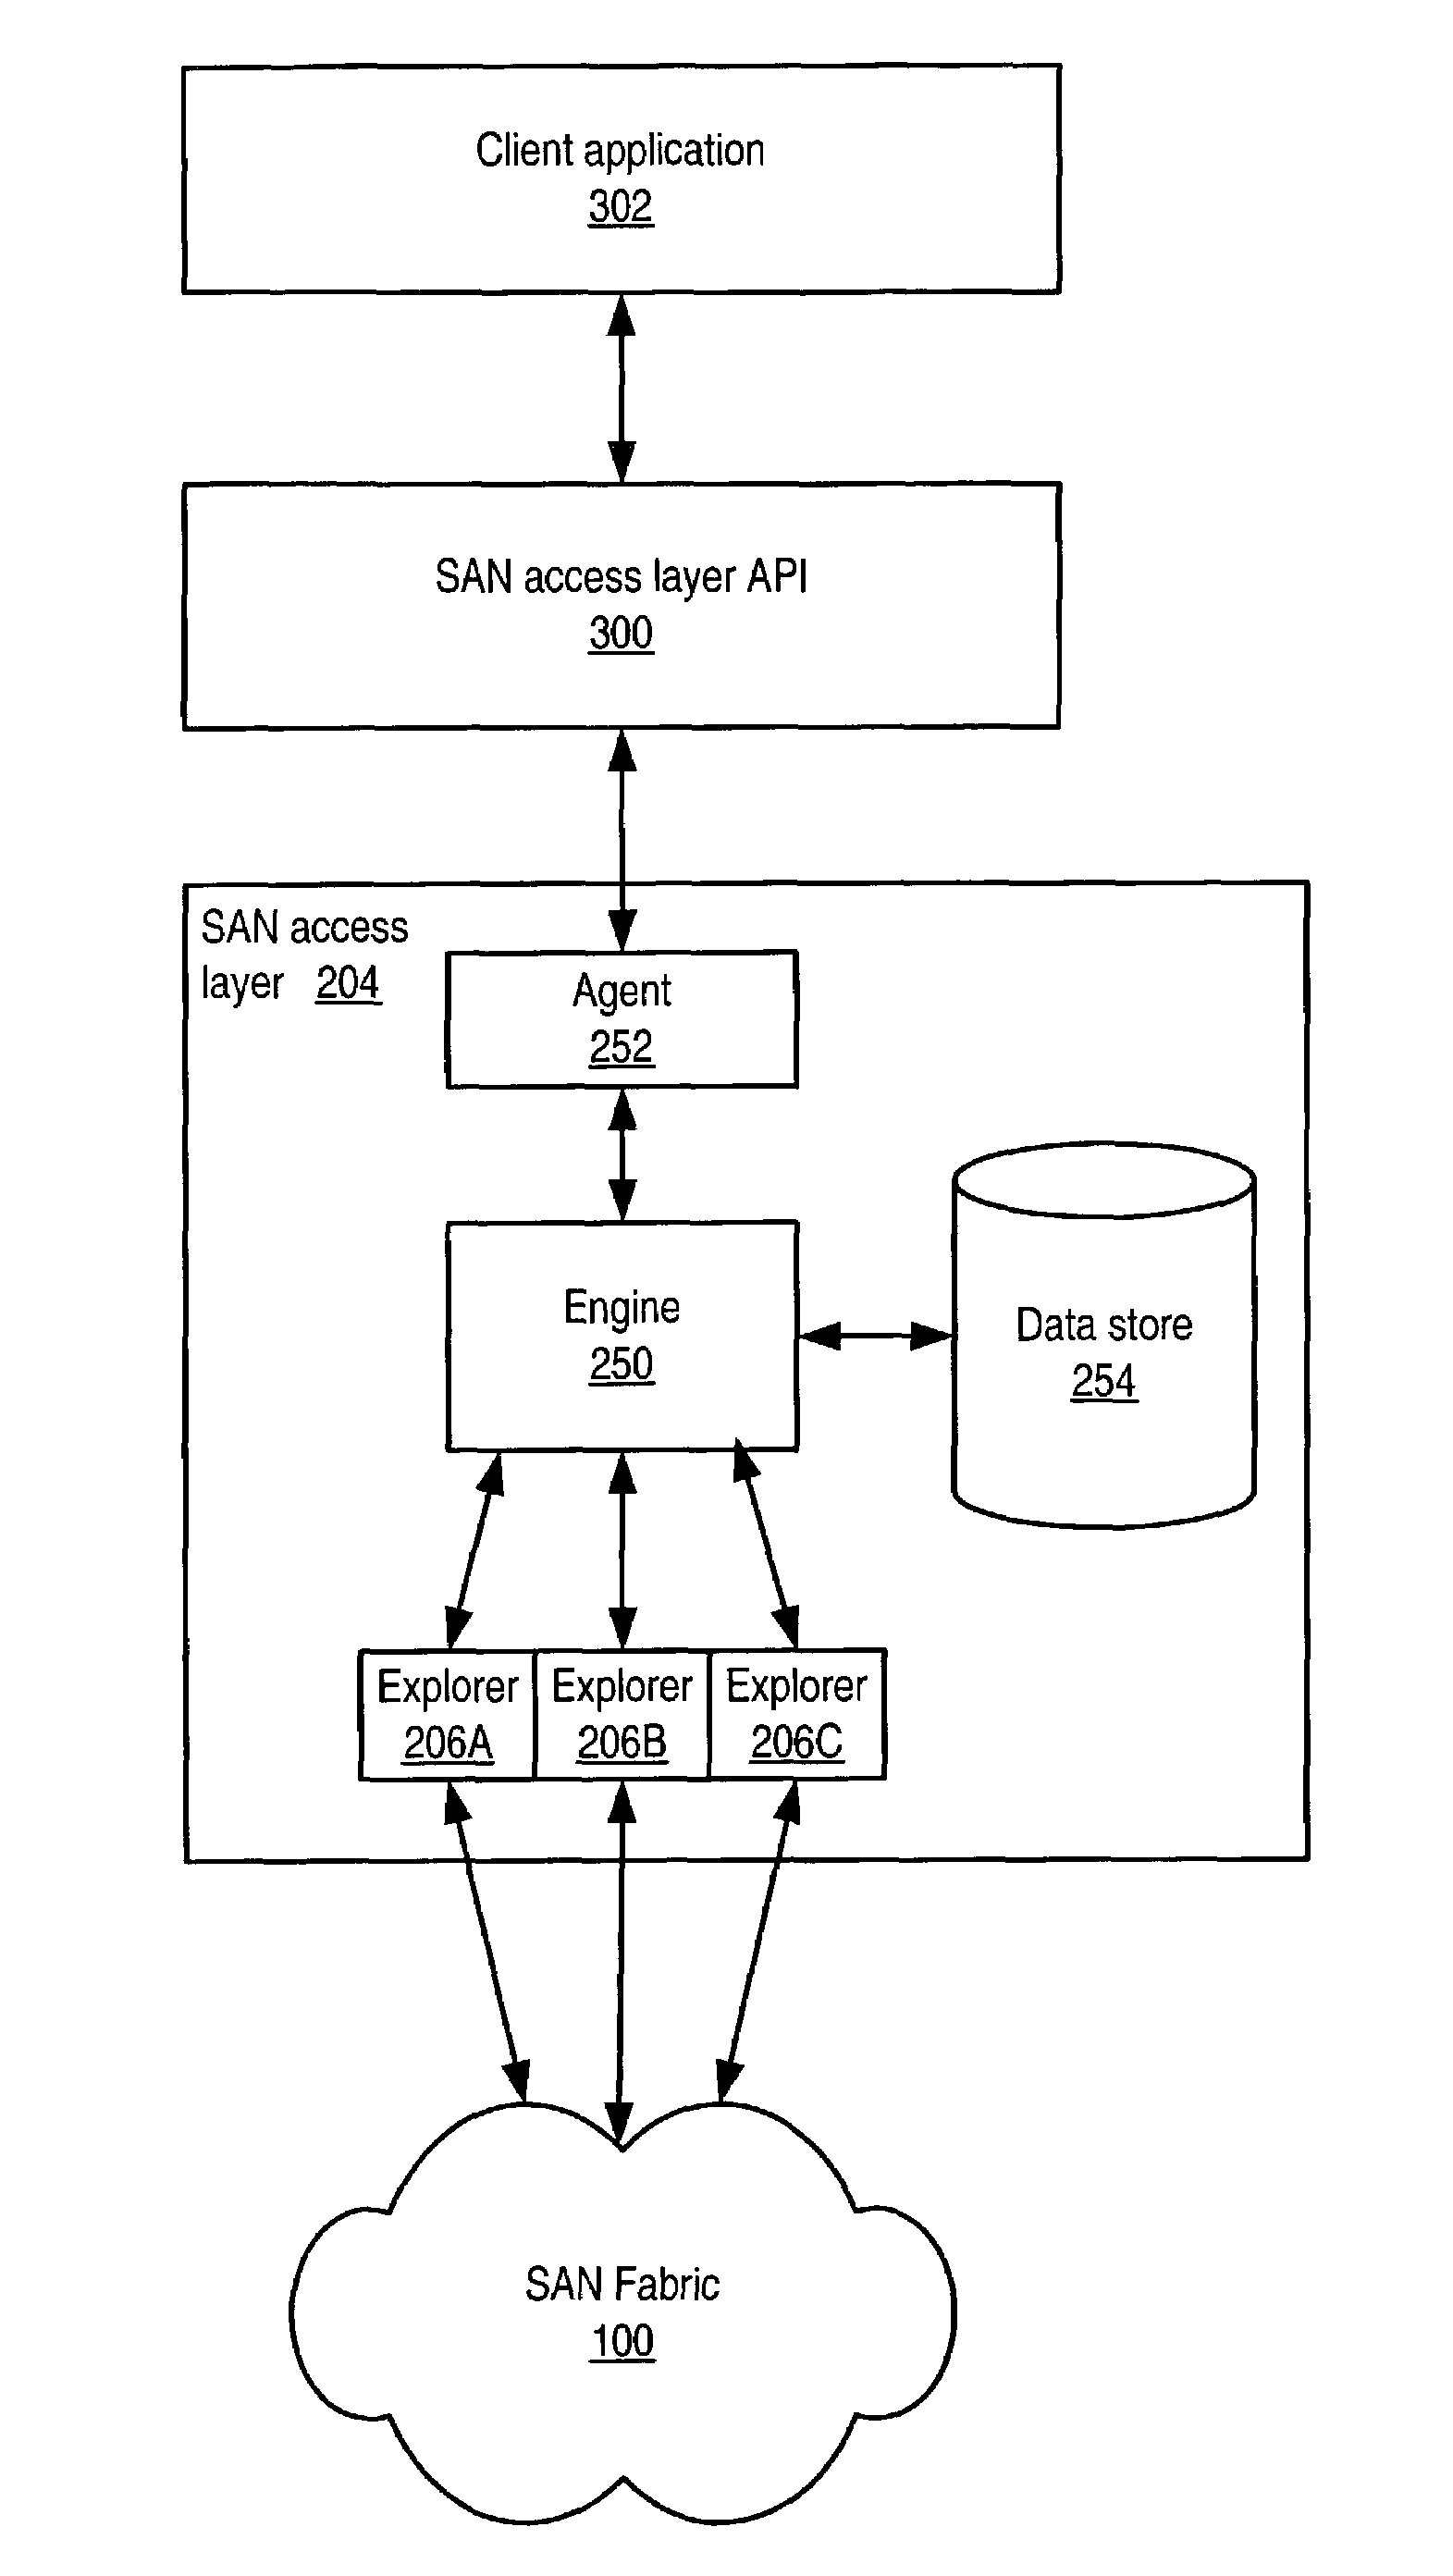 System and method for an access layer application programming interface for managing heterogeneous components of a storage area network